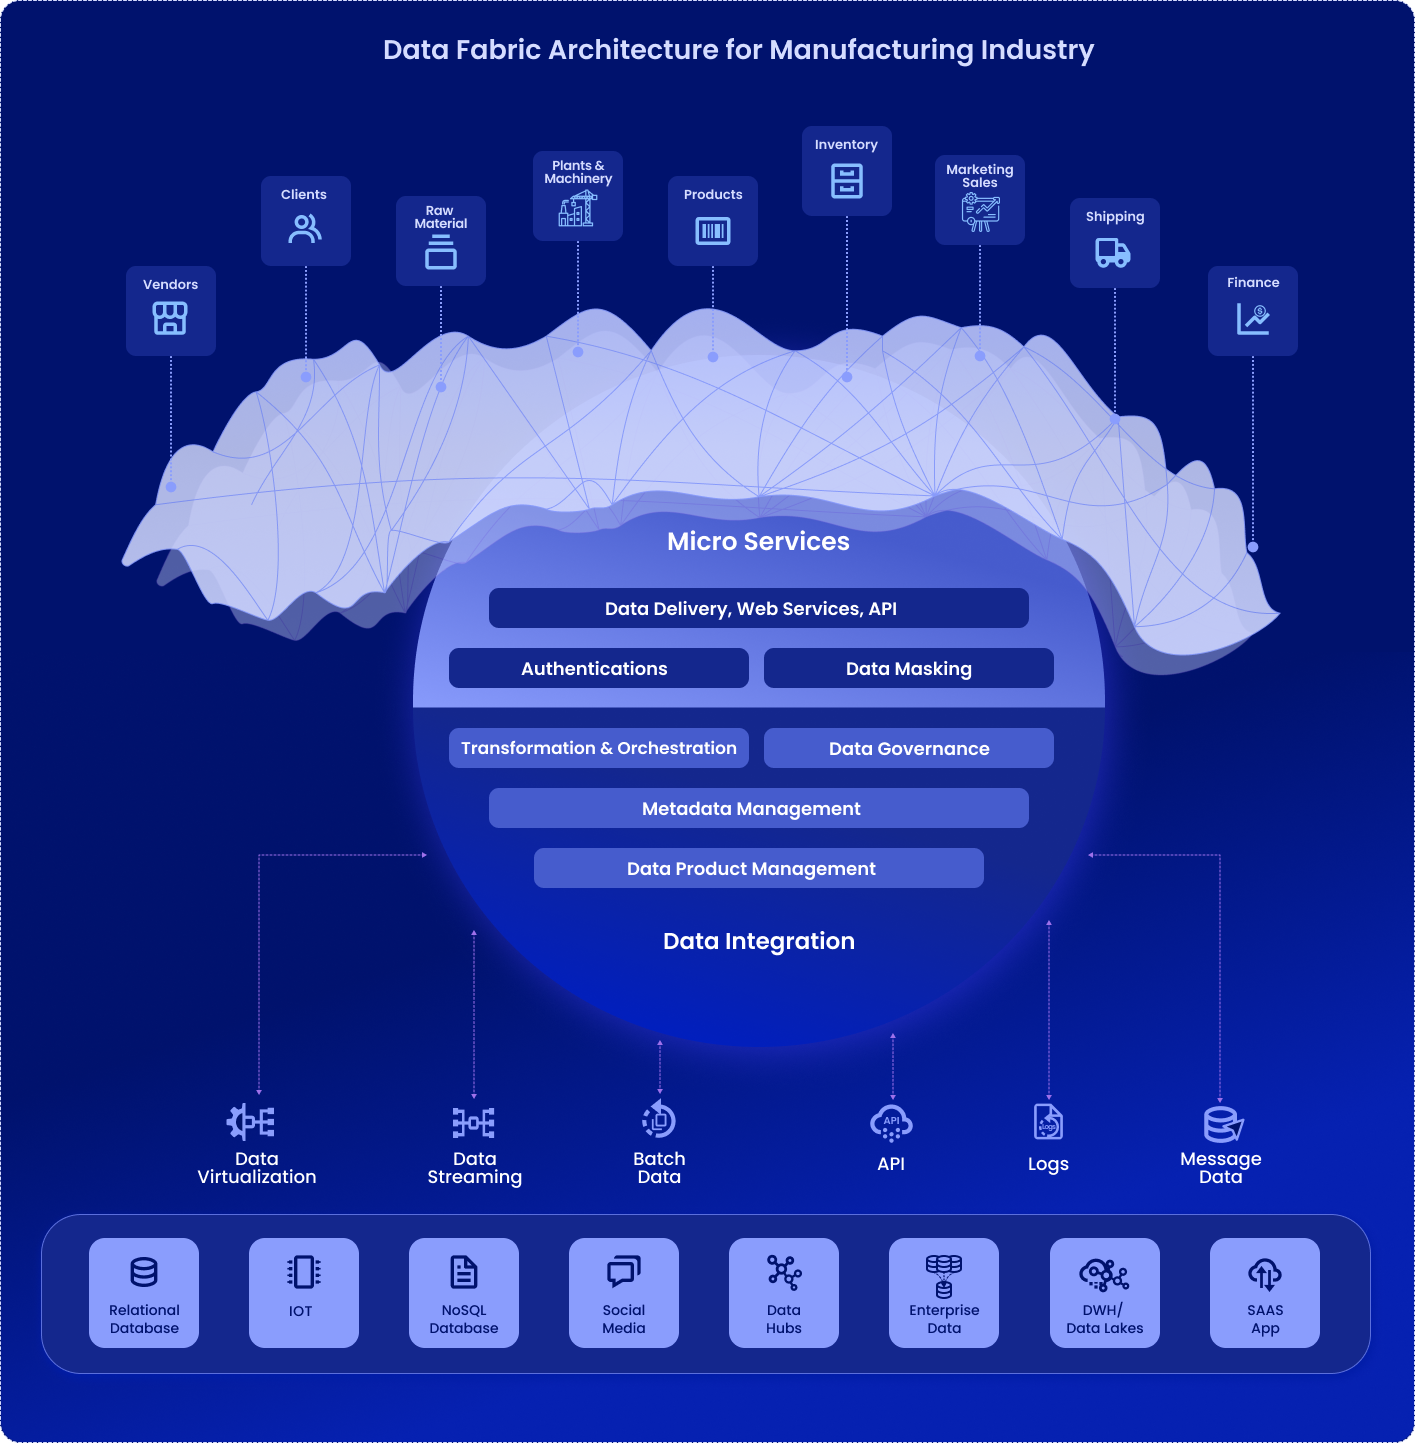 Data Fabric Architecture for Manufacturing Industry